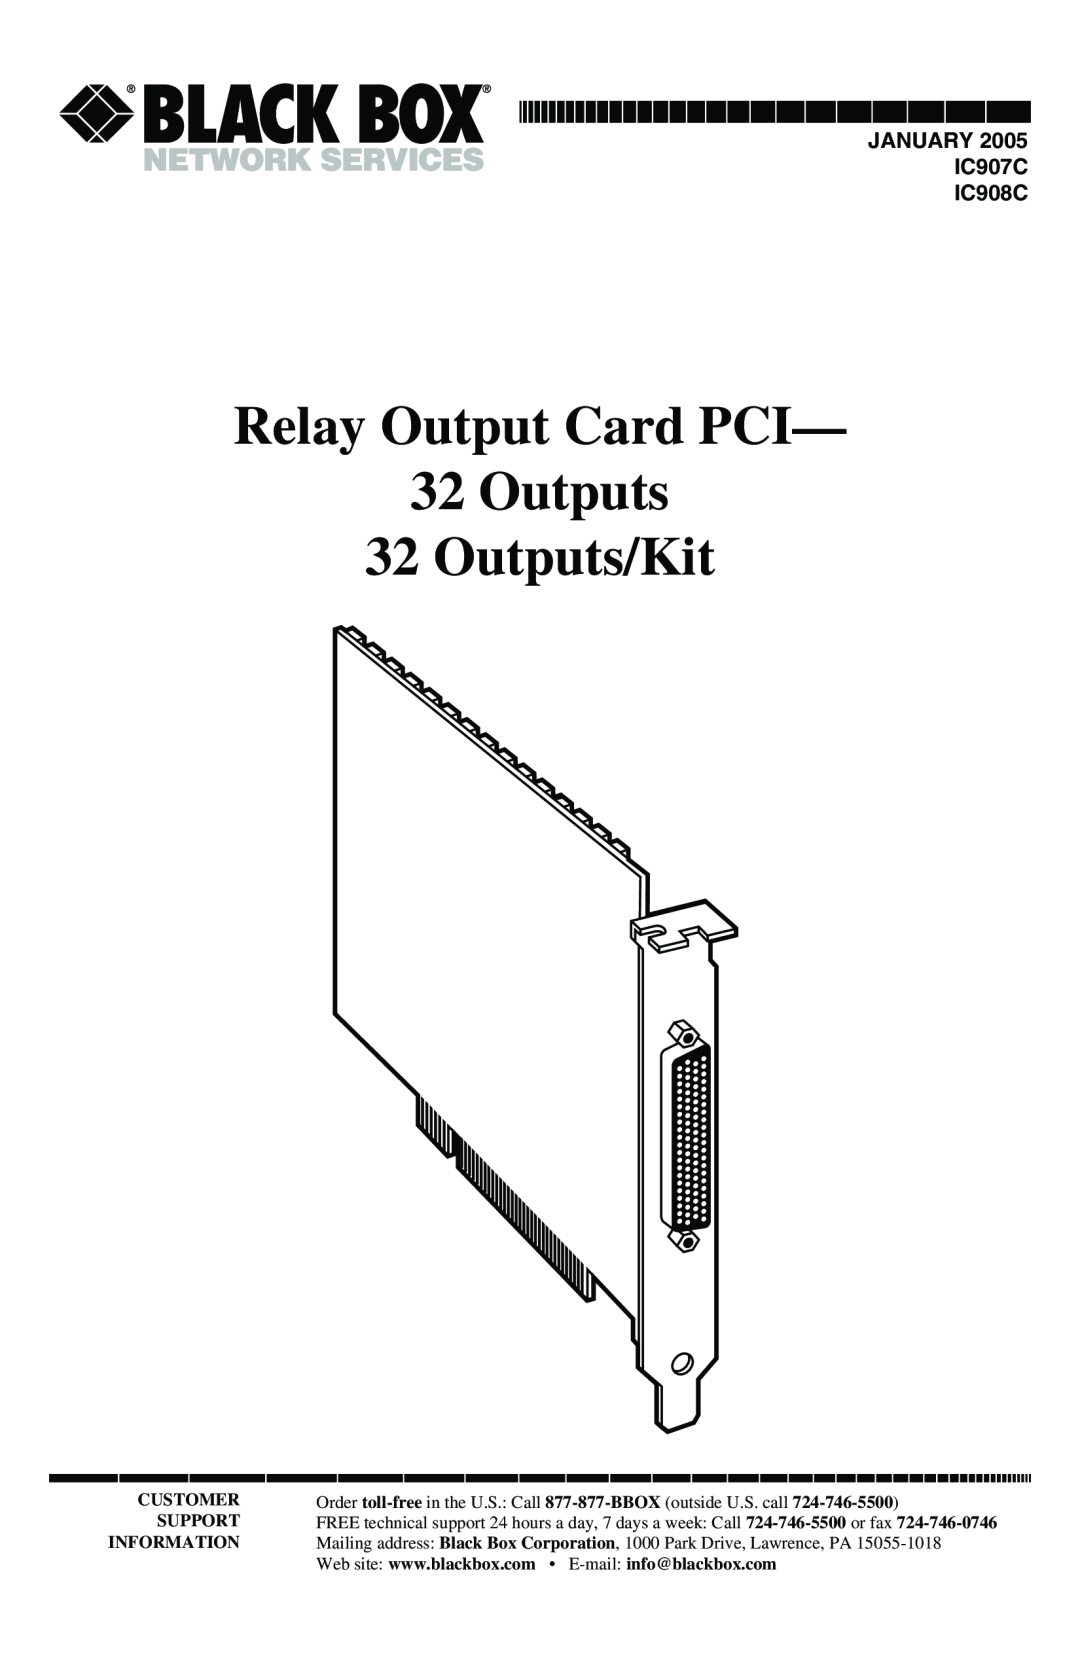 Black Box manual Relay Output Card PCI- 32Outputs 32 Outputs/Kit, JANUARY IC907C IC908C, Customer, Support 